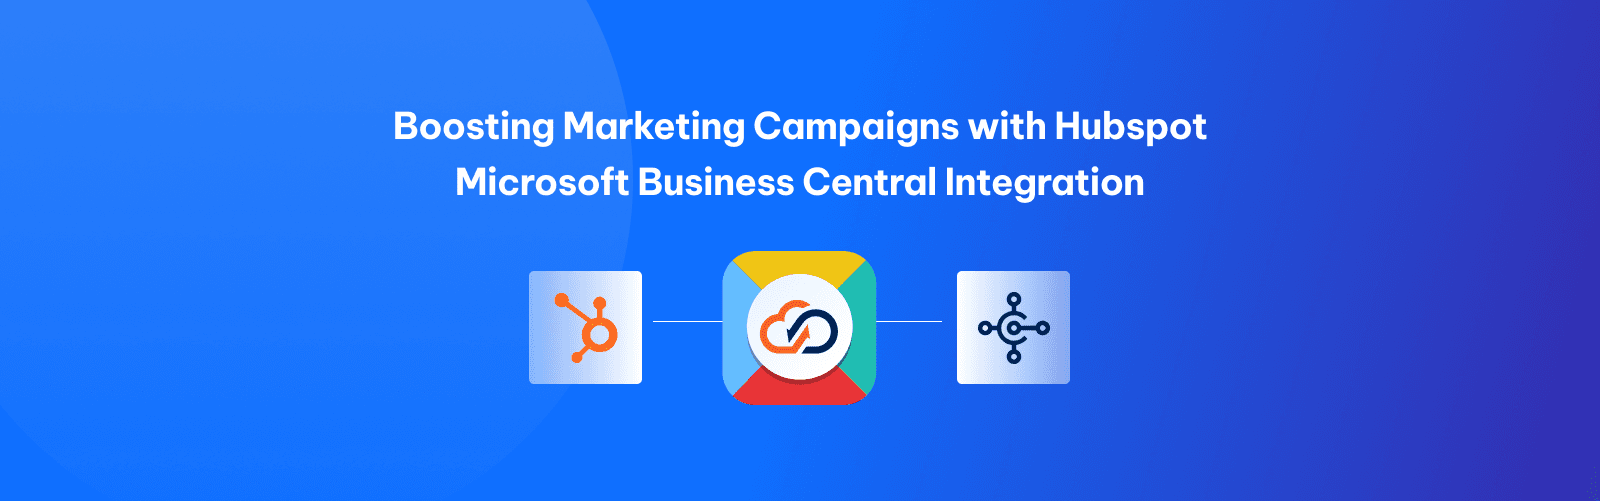 Boosting Marketing Campaigns with Hubspot Microsoft Business Central Integration